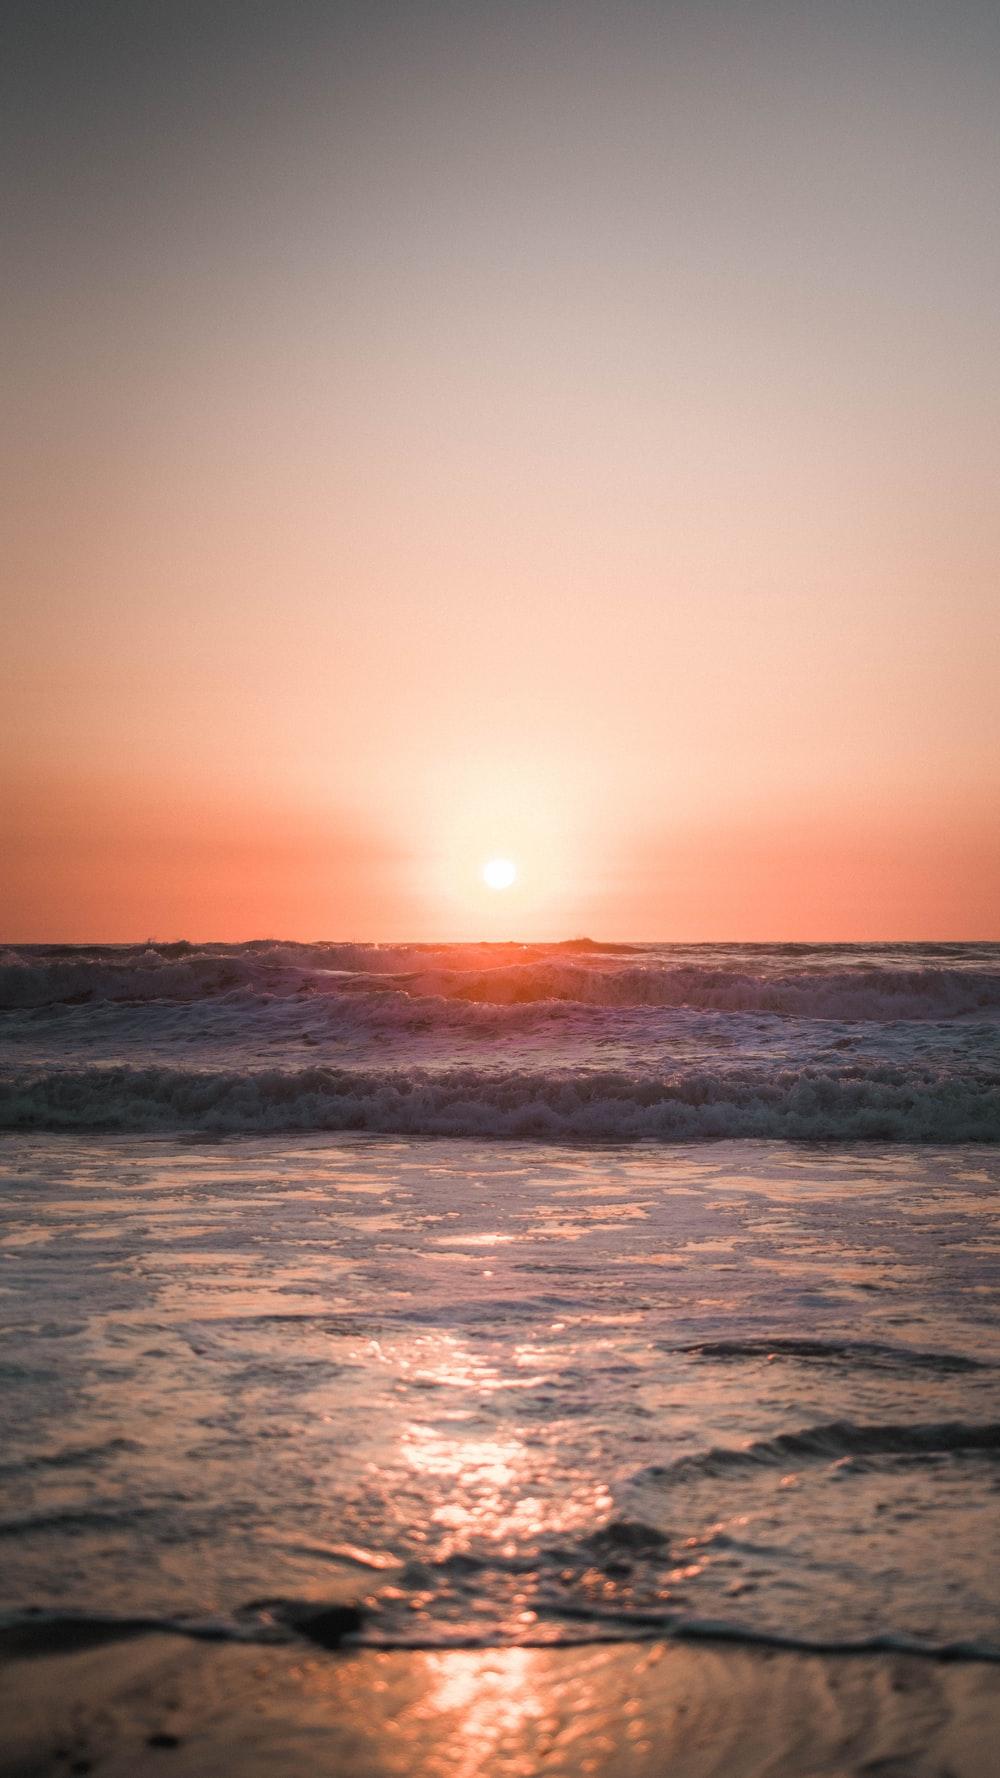 Ocean Sunset Picture. Download Free Image